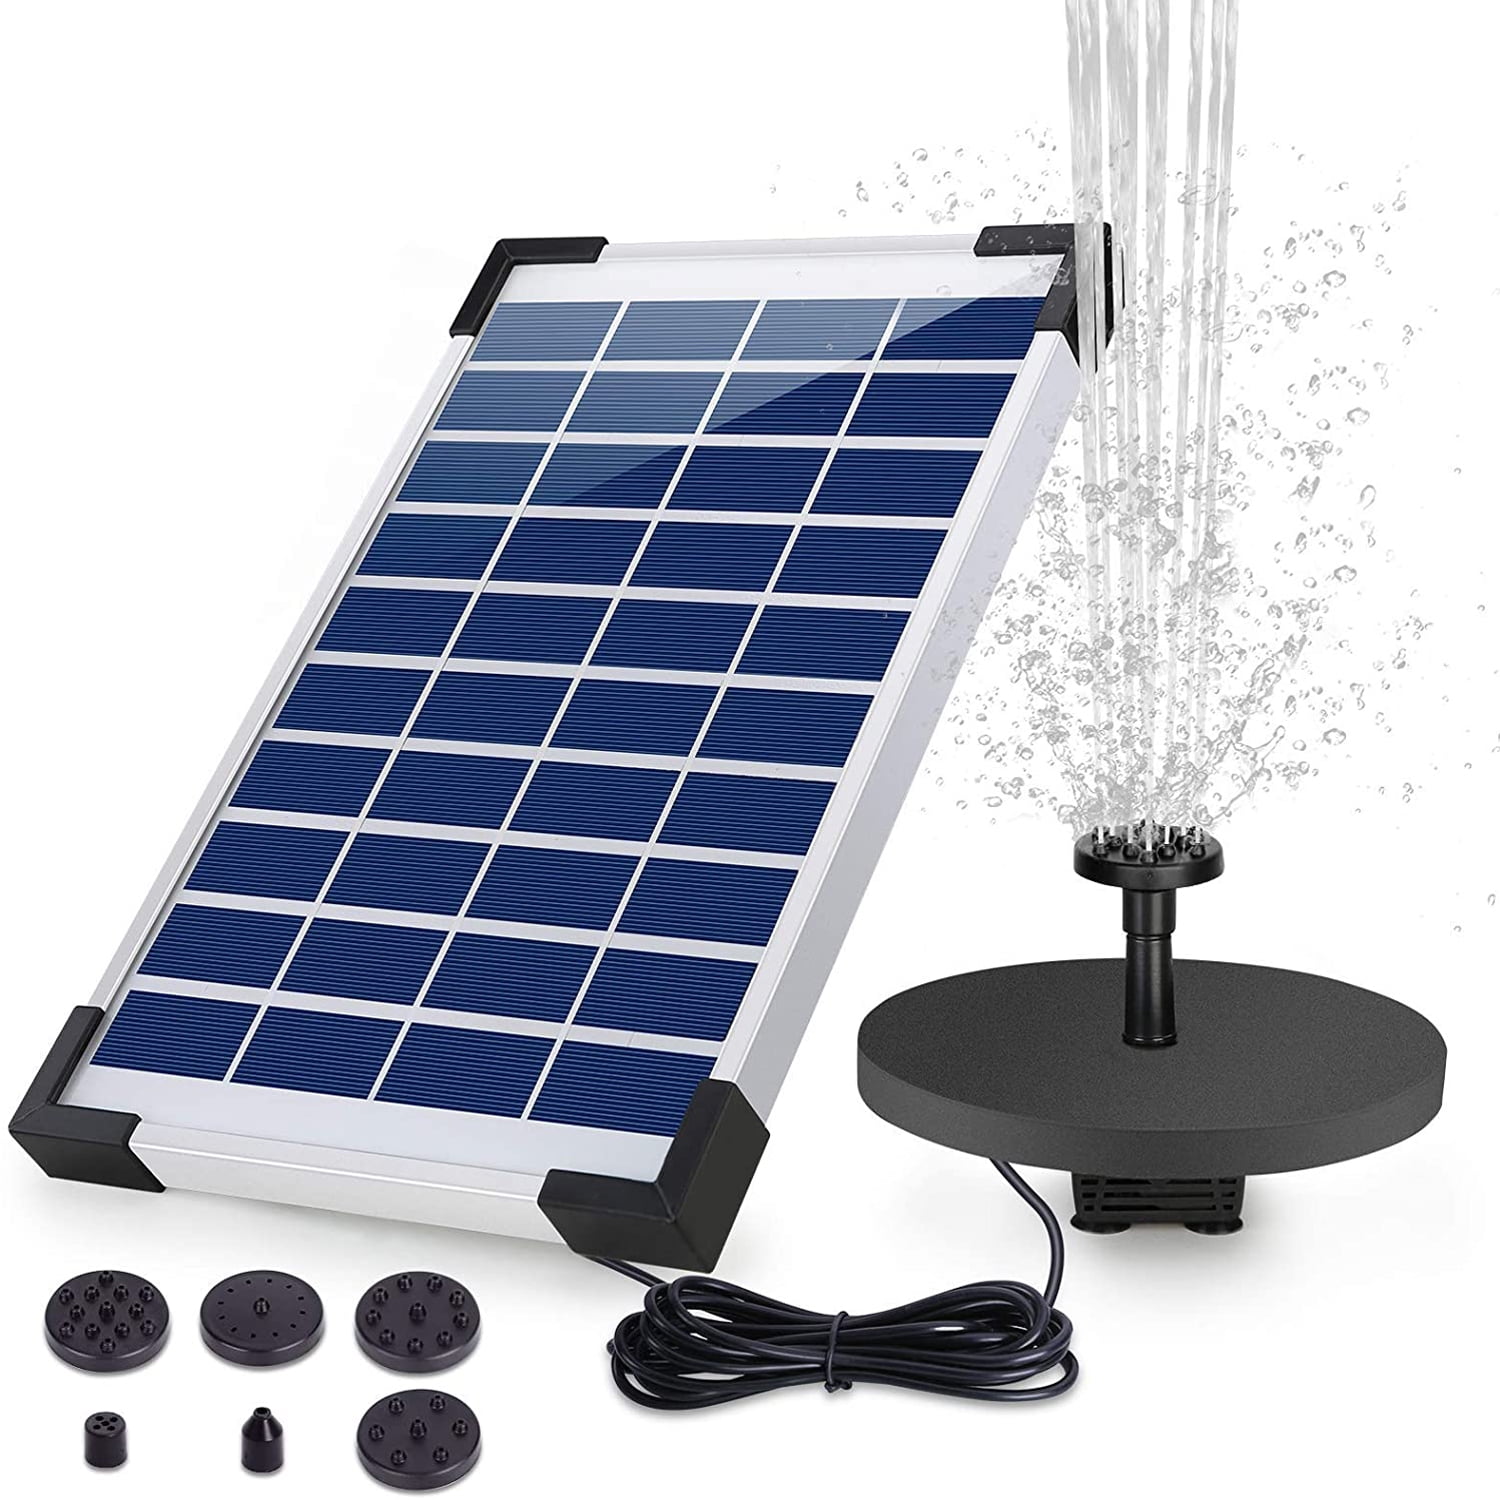 Solar Panel Power Submersible Floating Fountain Pool Pond Water Pump 6 Nozzles 